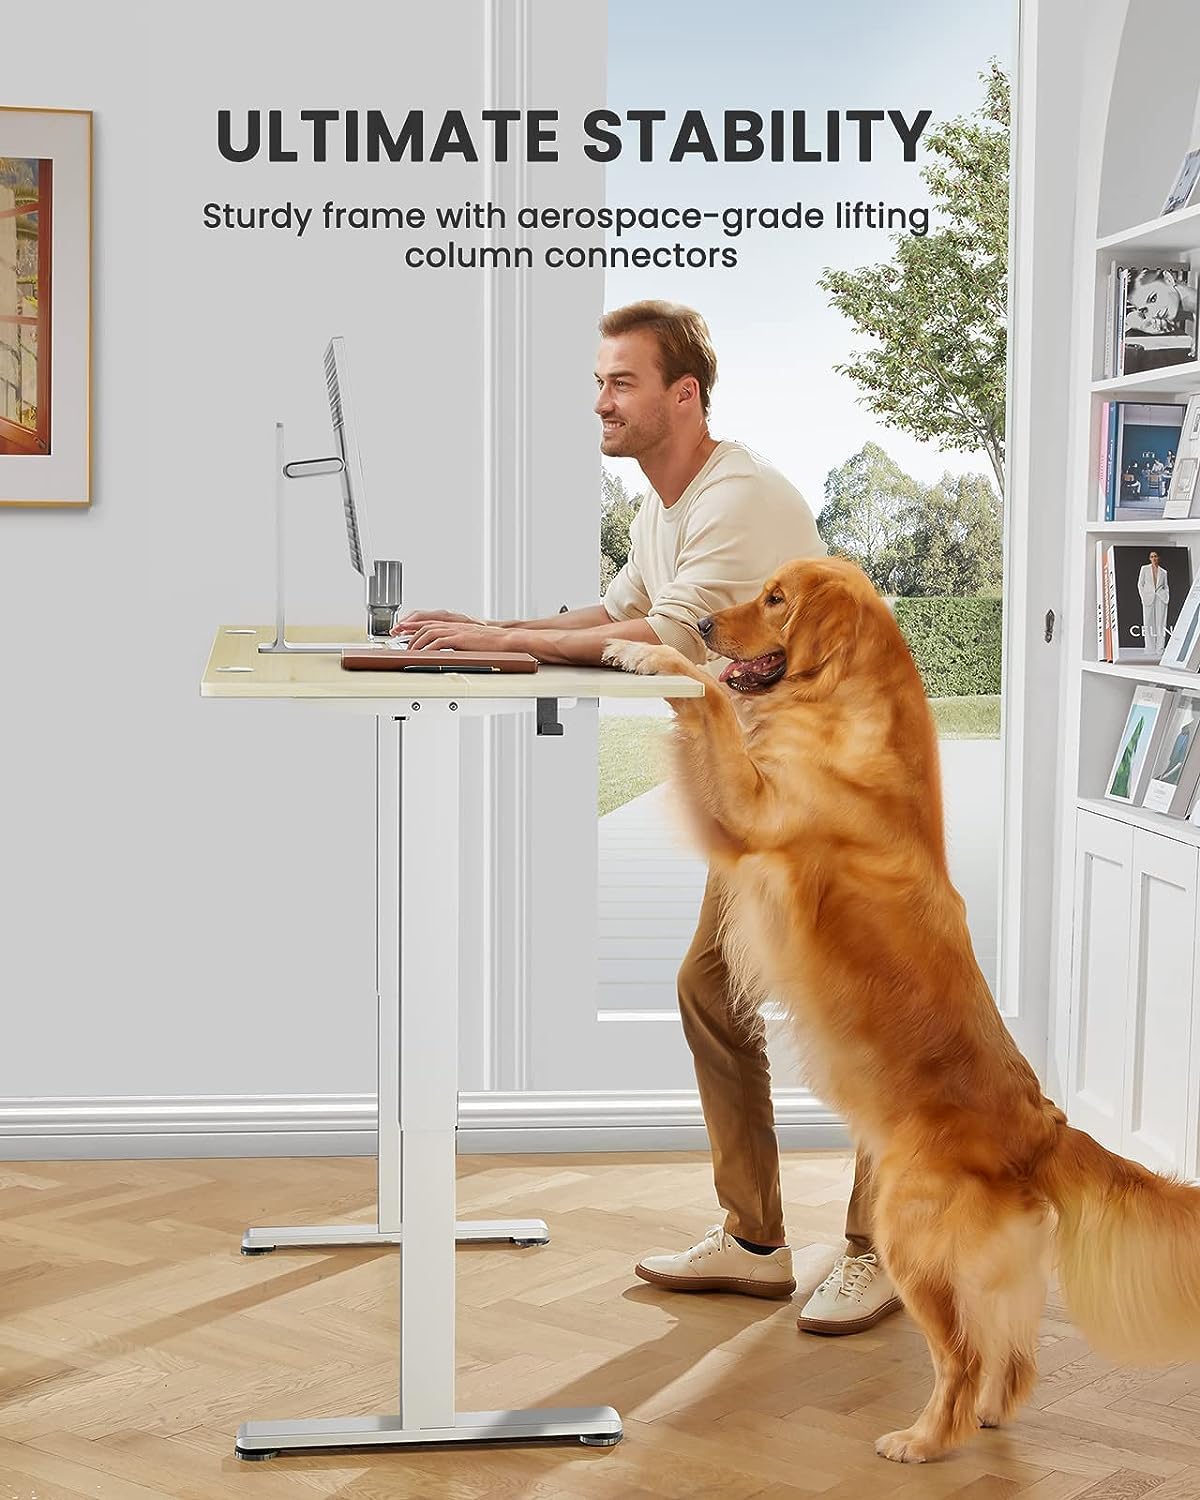 ErGear Height Adjustable Electric Standing Desk, 55 x 28 Inches - $140